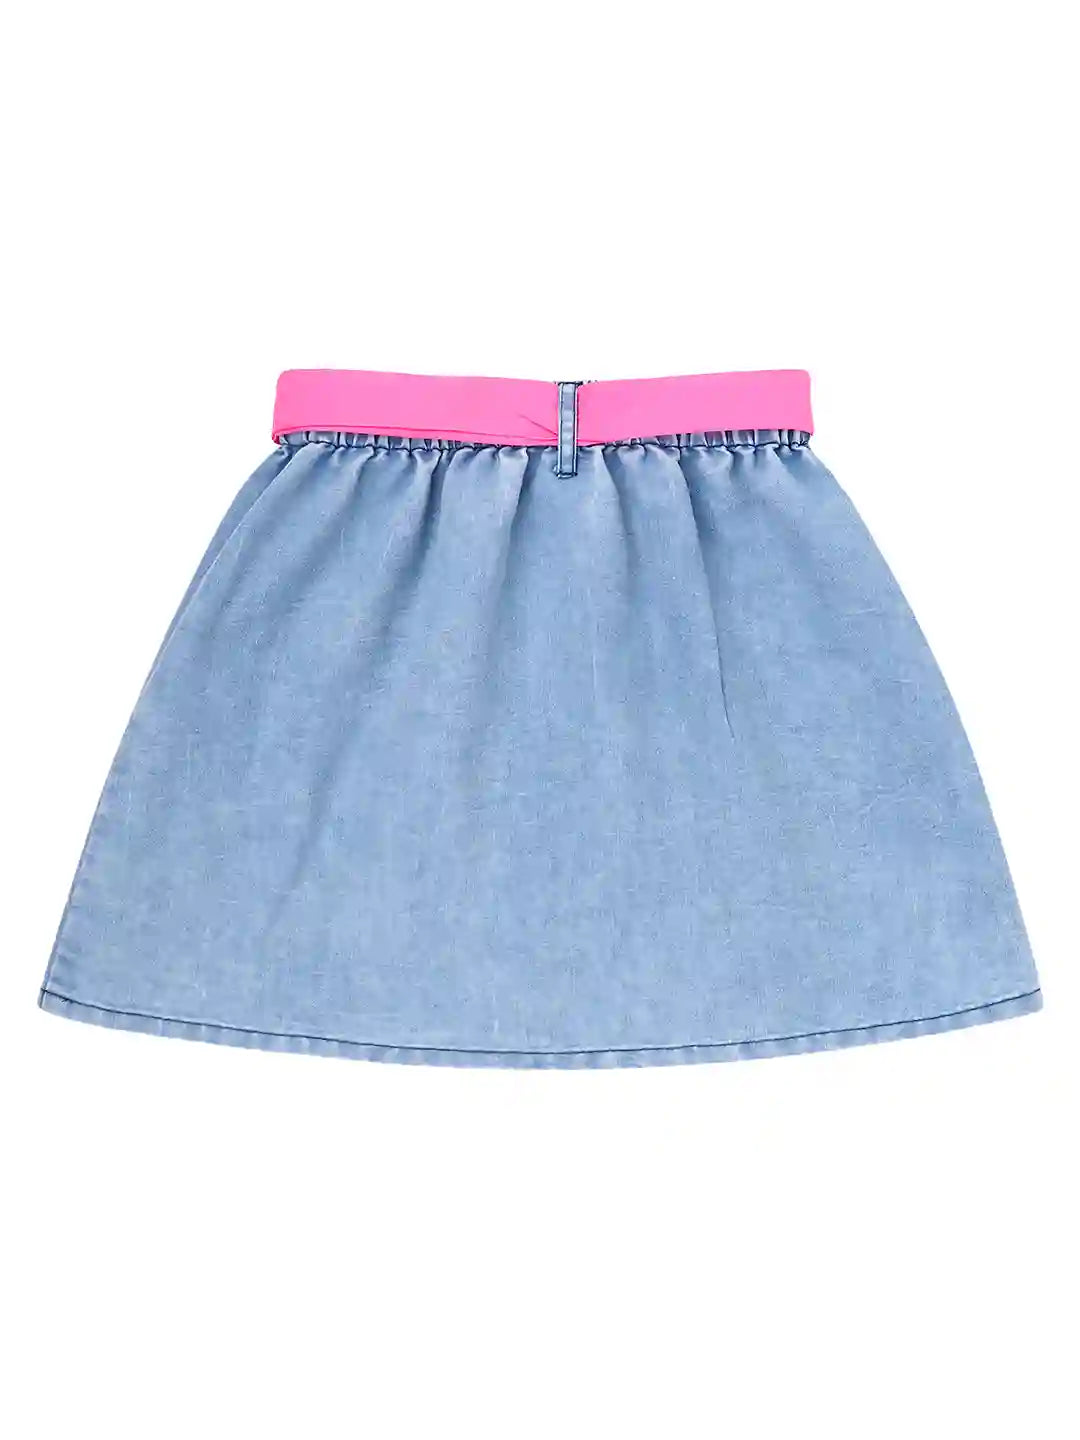 Girls Pure Cotton Denim Top with Skirt Co-ord Set, Blue Colour